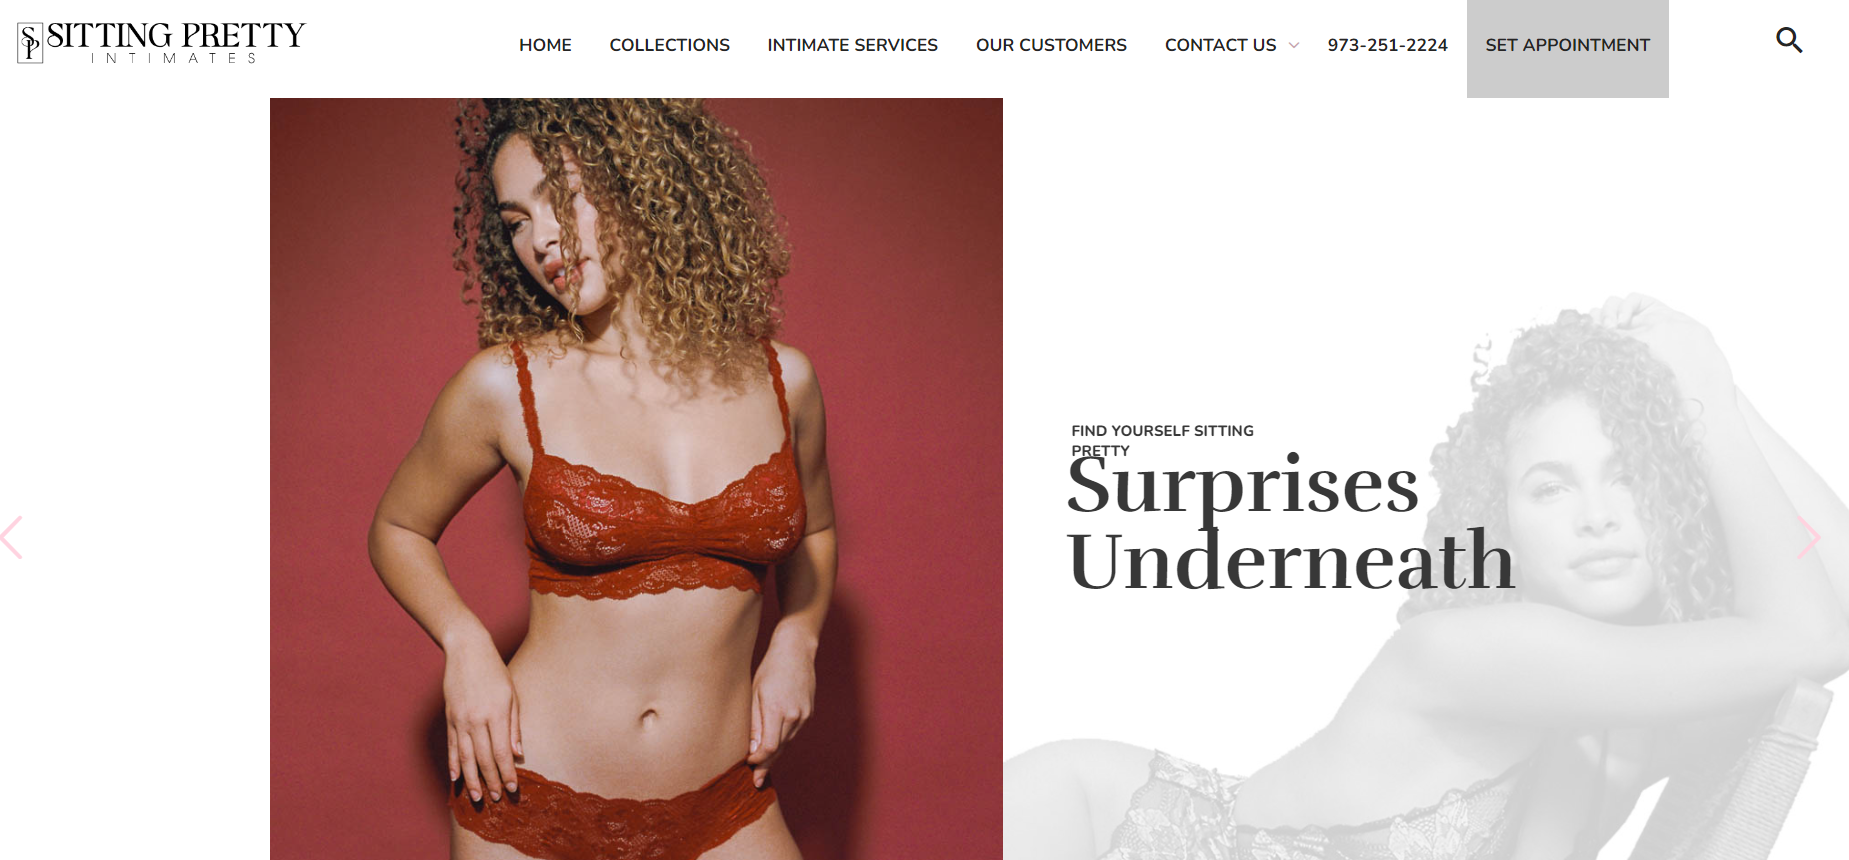 Sitting Pretty Intimates is a specialized wholesale clothing supplier focusing on lingerie, swimwear, and bra fittings. They offer a wide range of lingerie and sleepwear for women of all ages, ensuring a perfect fit and comfort. 